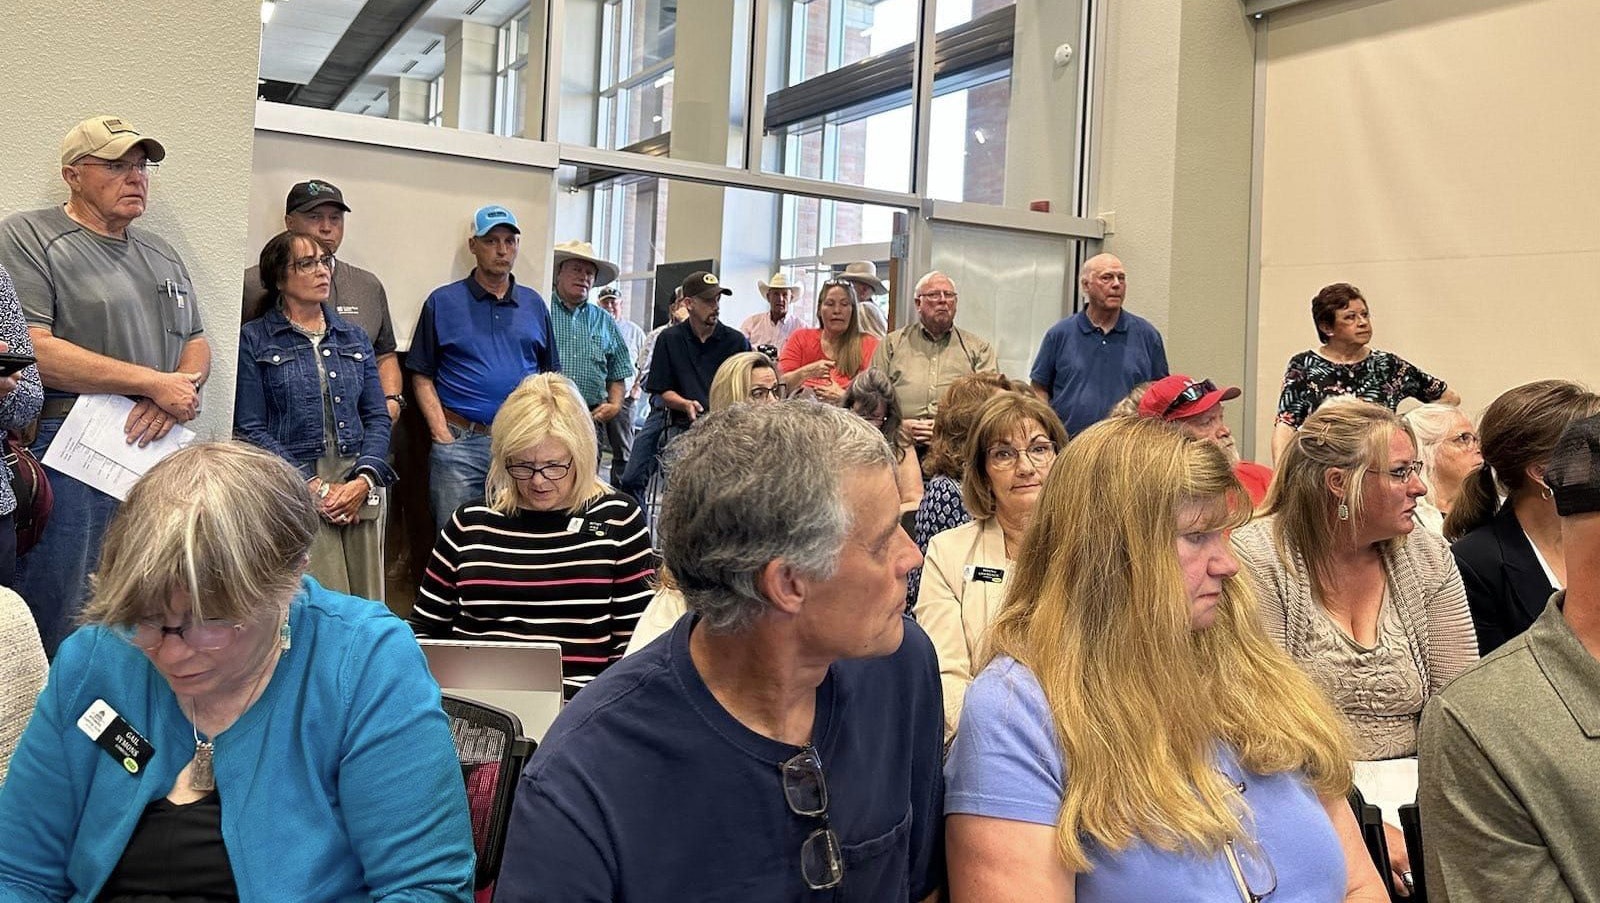 Wyoming residents pack a meeting room at Sheridan College on June 26 to tell lawmakers what they think about soaring property tax rates.